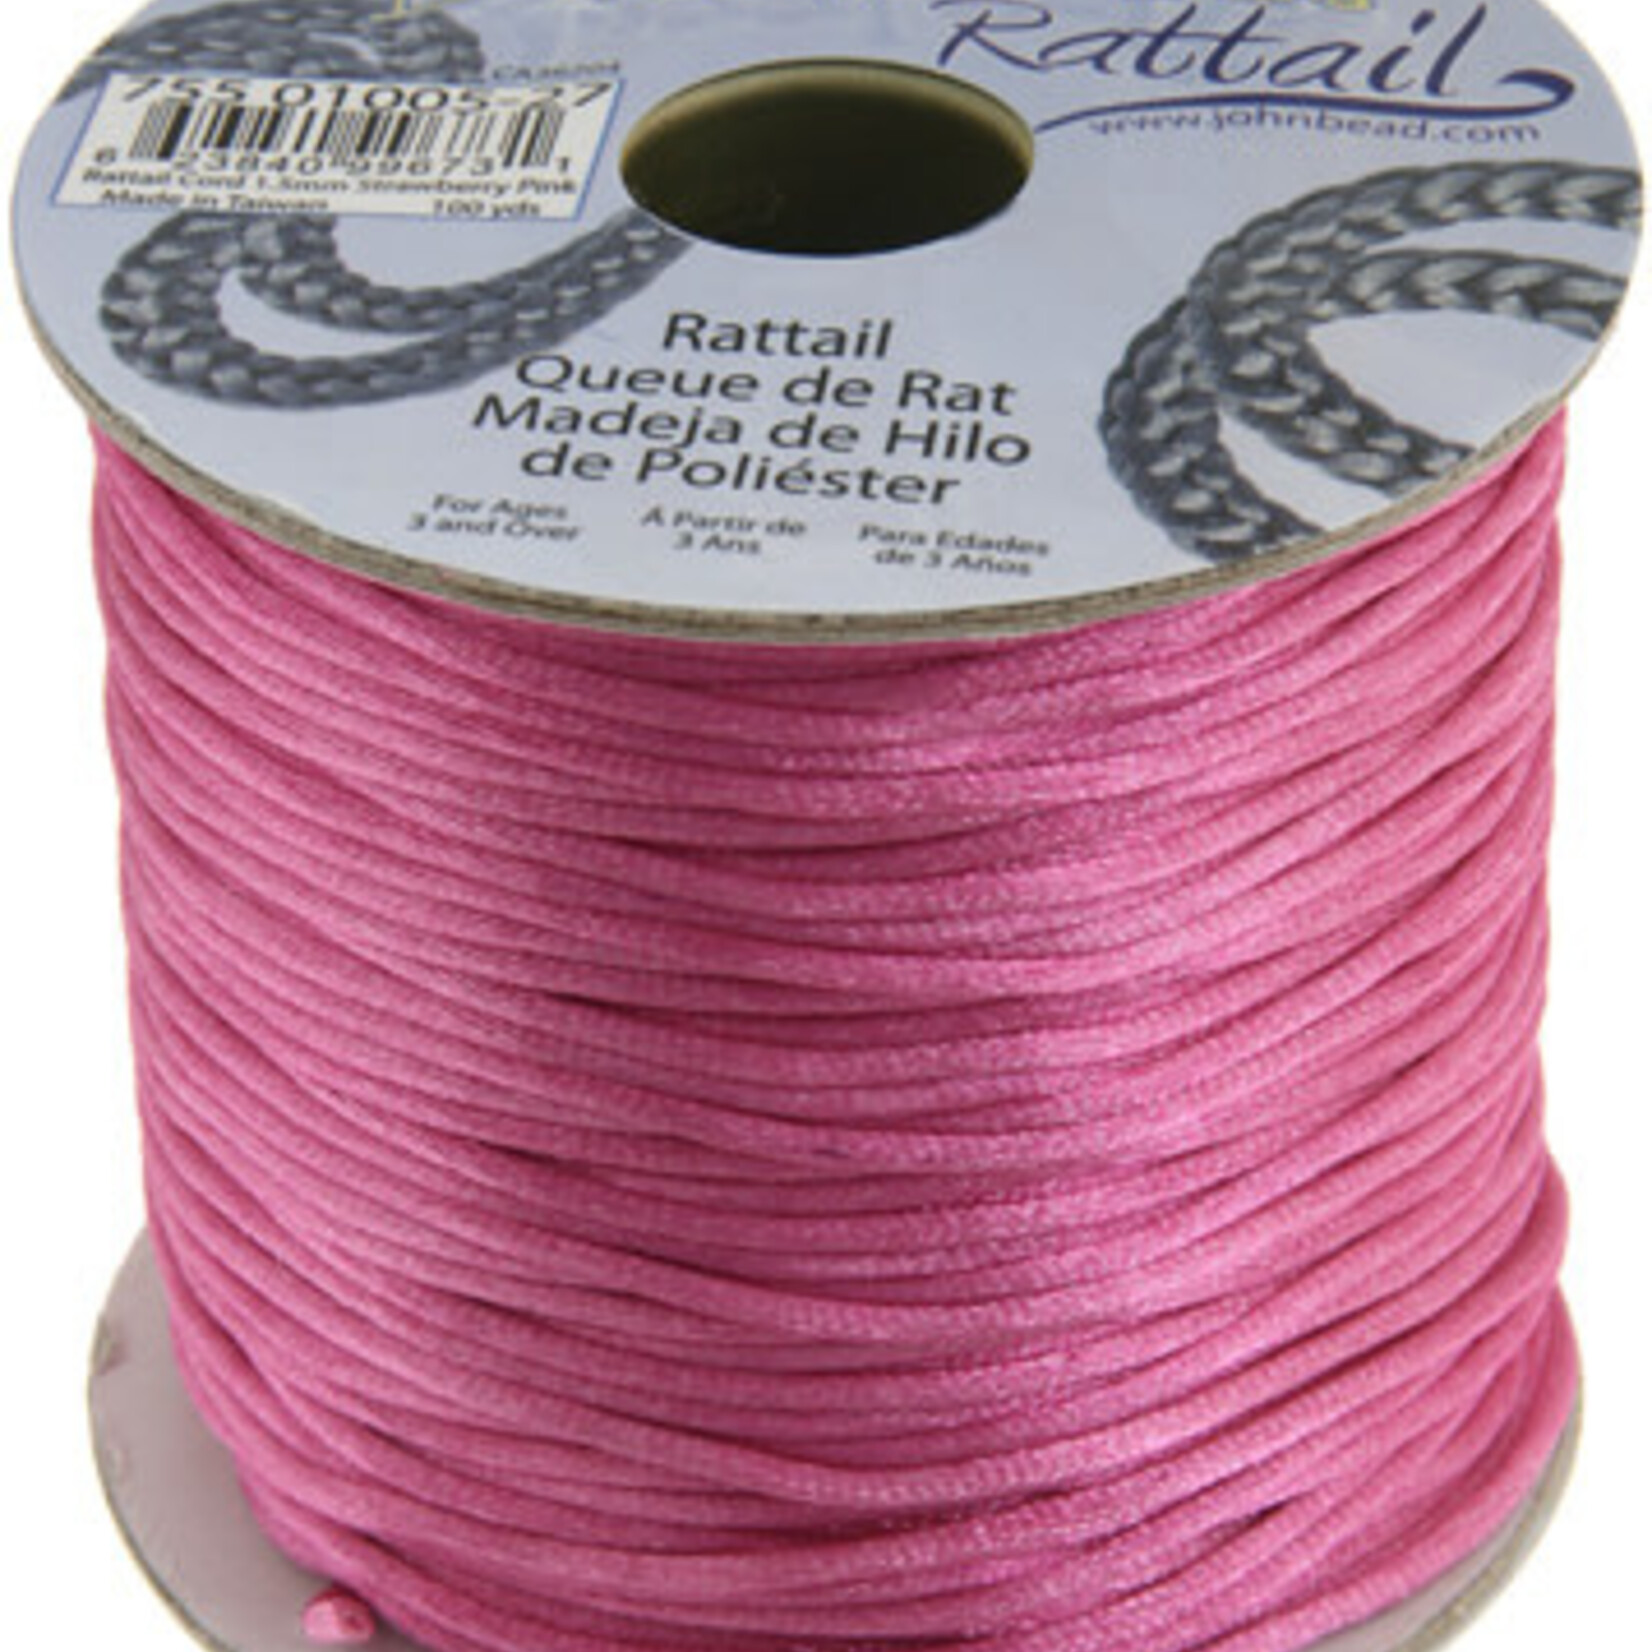 Rattail Cord 1.5mm (100 yards)  Strawberry Pink